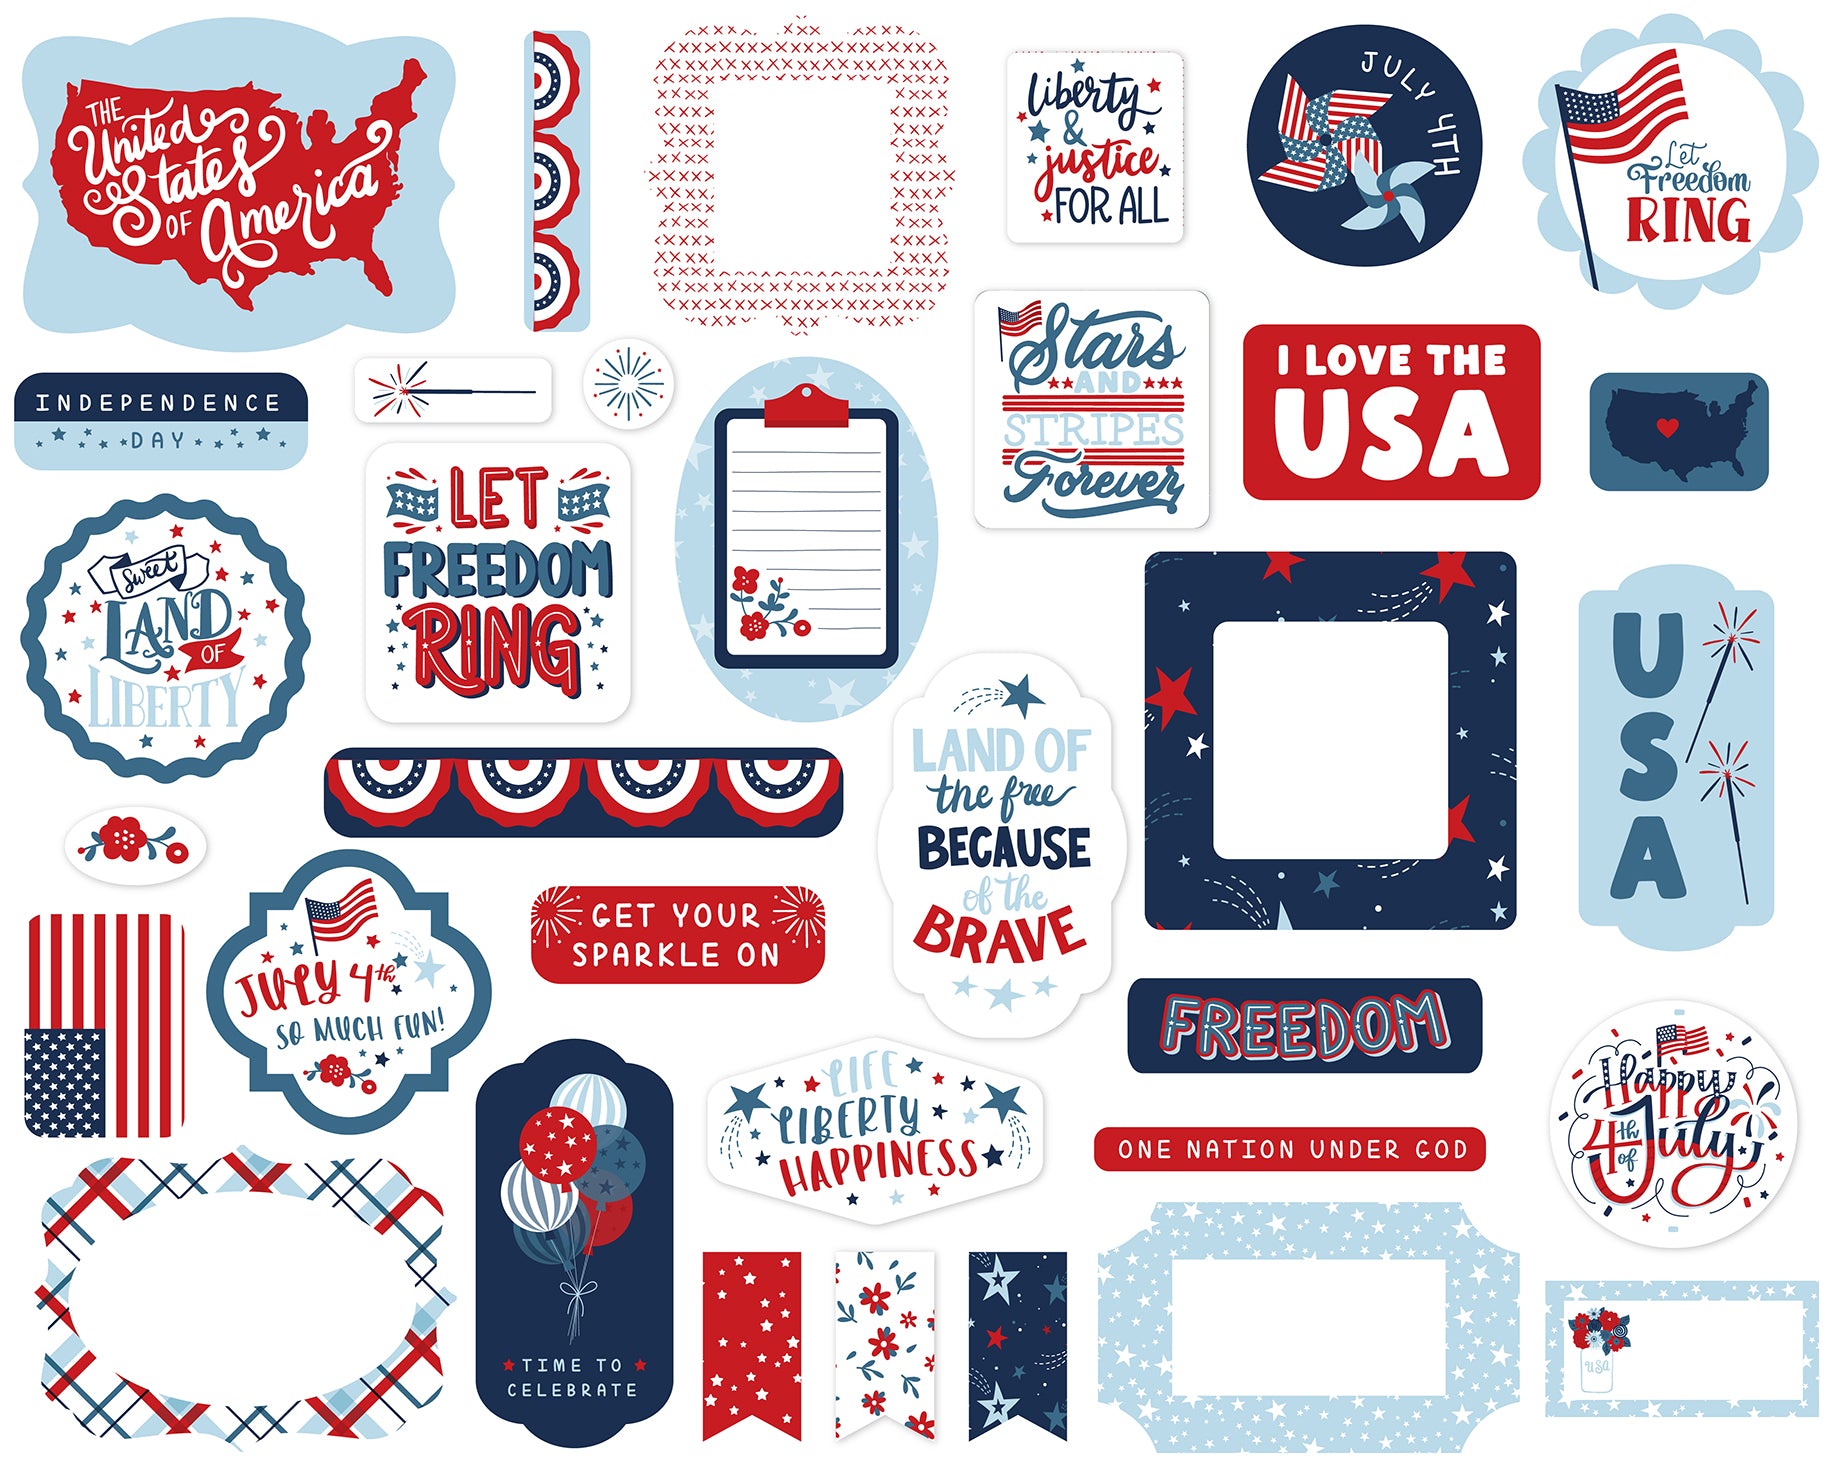 Stars and Stripes Forever Collection 5 x 5 Scrapbook Ephemera by Echo Park Paper